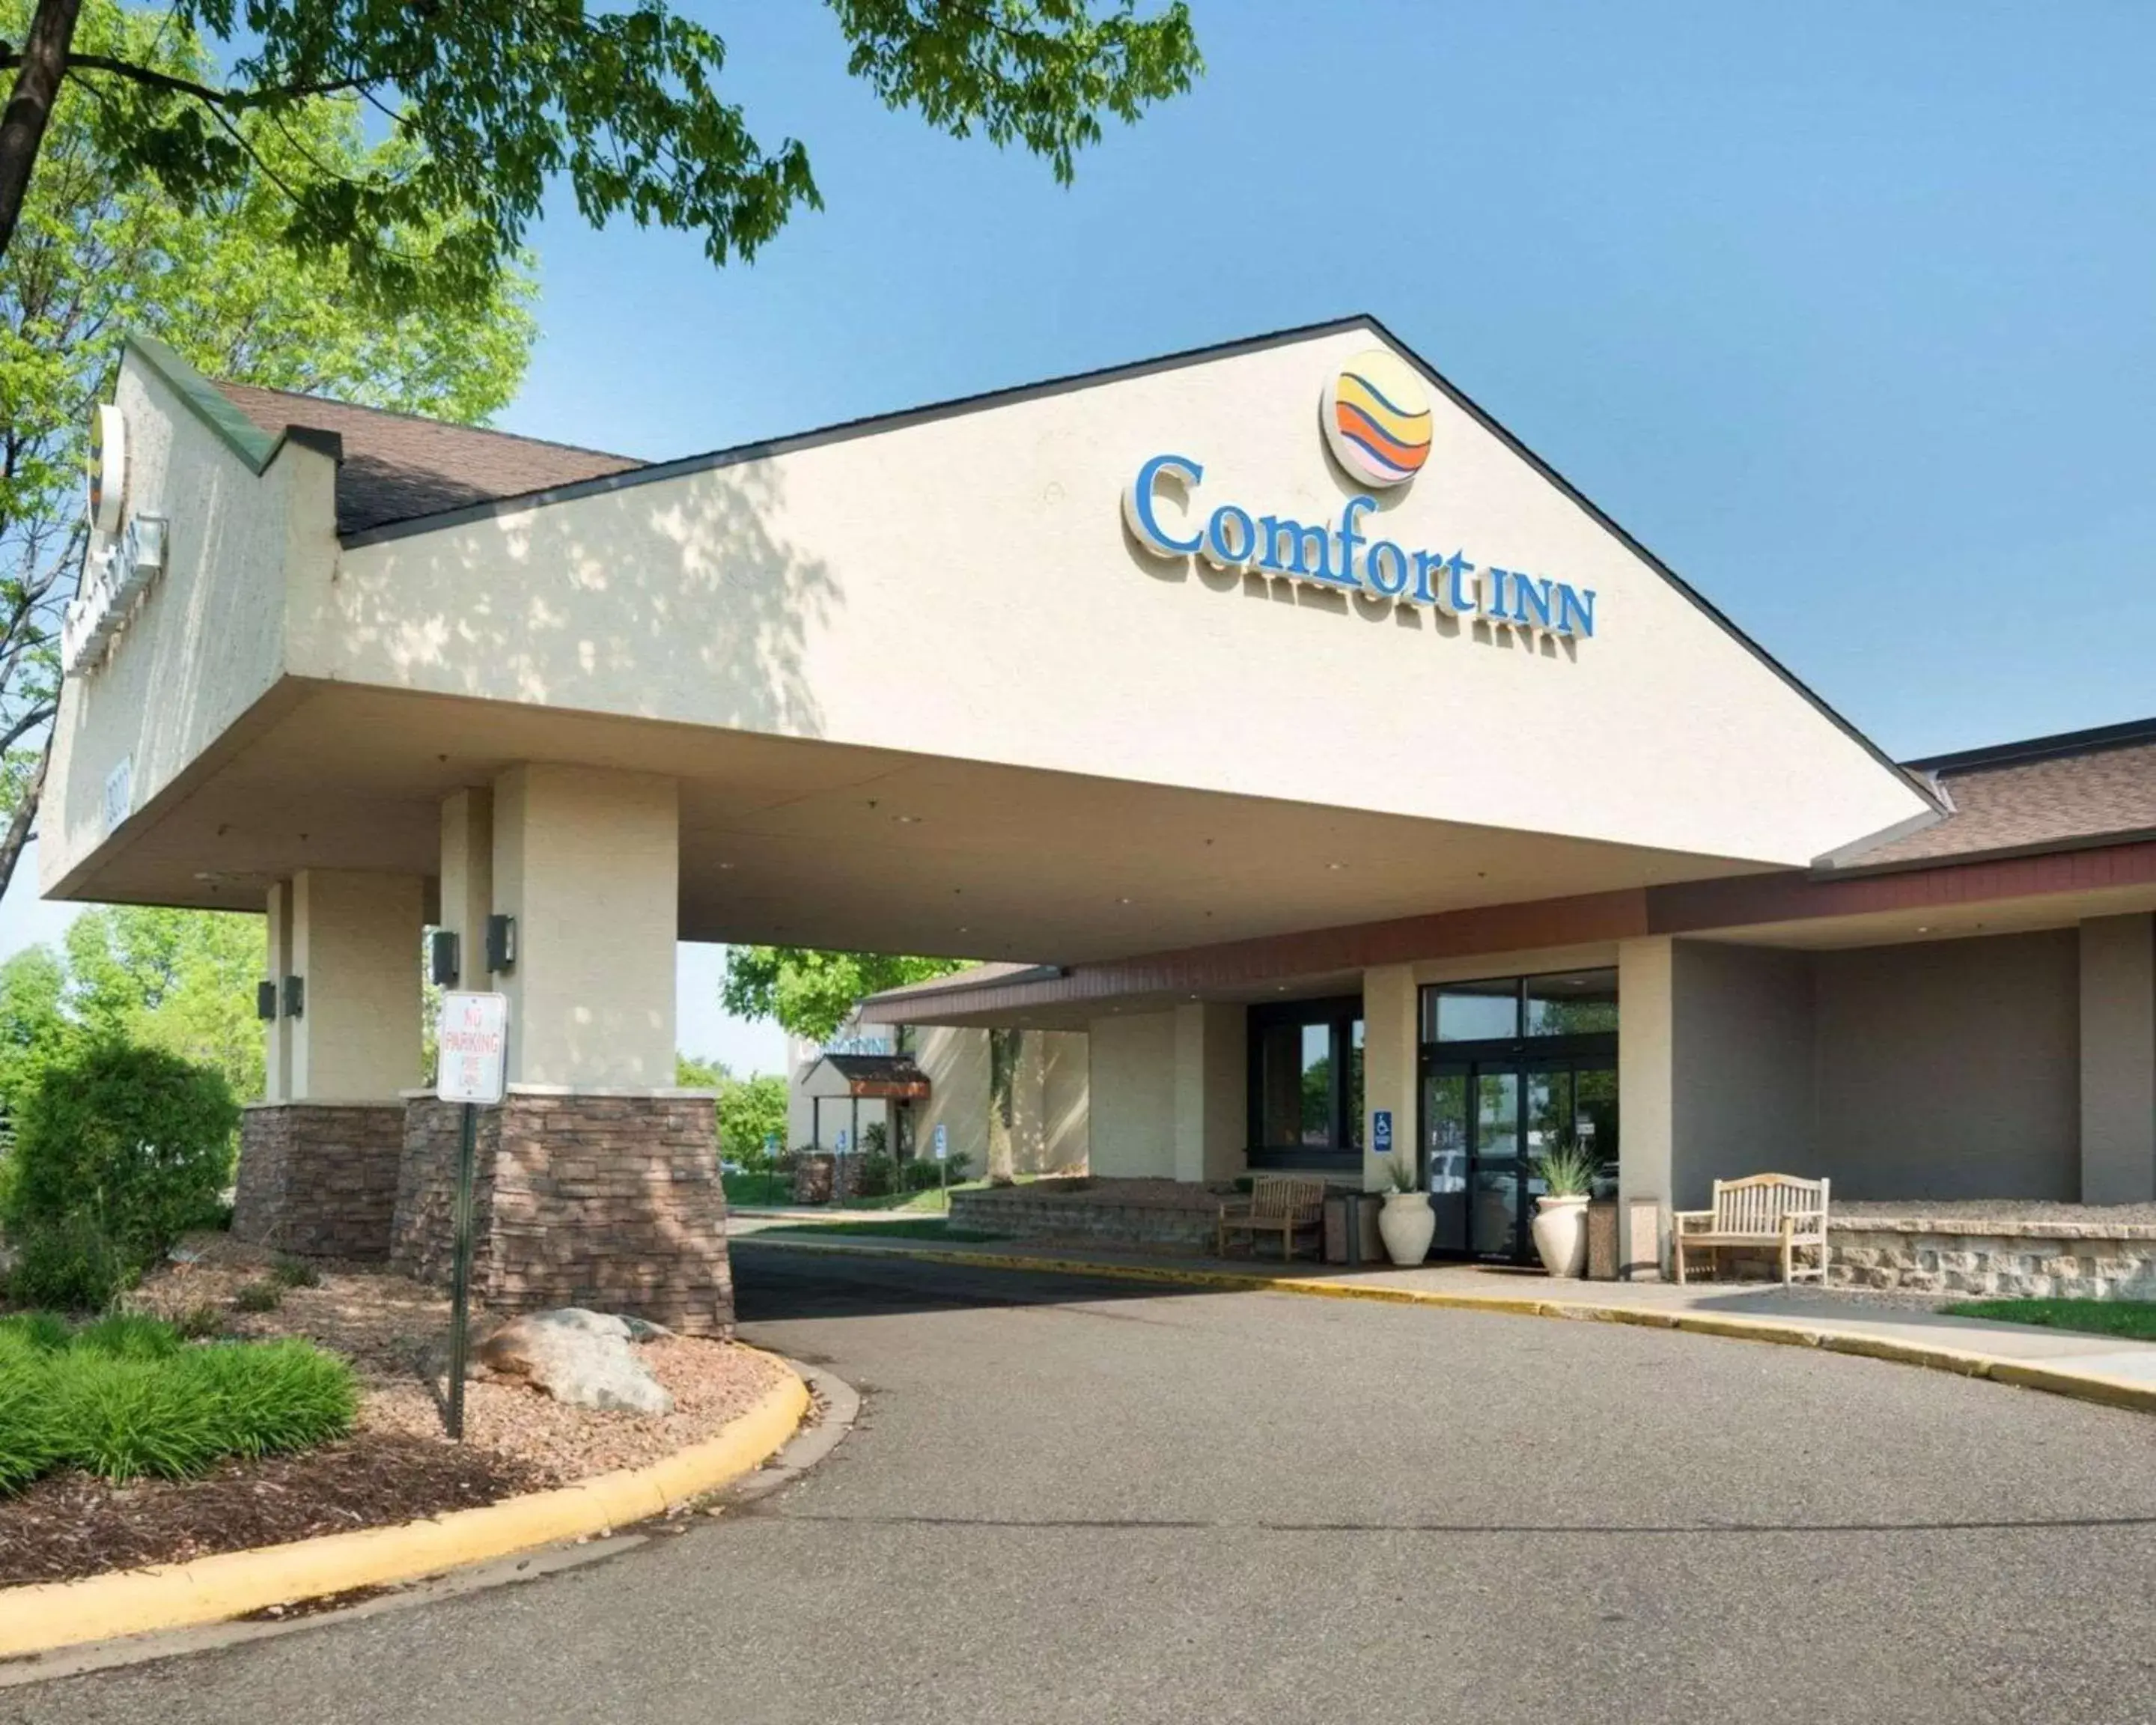 Property Building in Comfort Inn Plymouth-Minneapolis